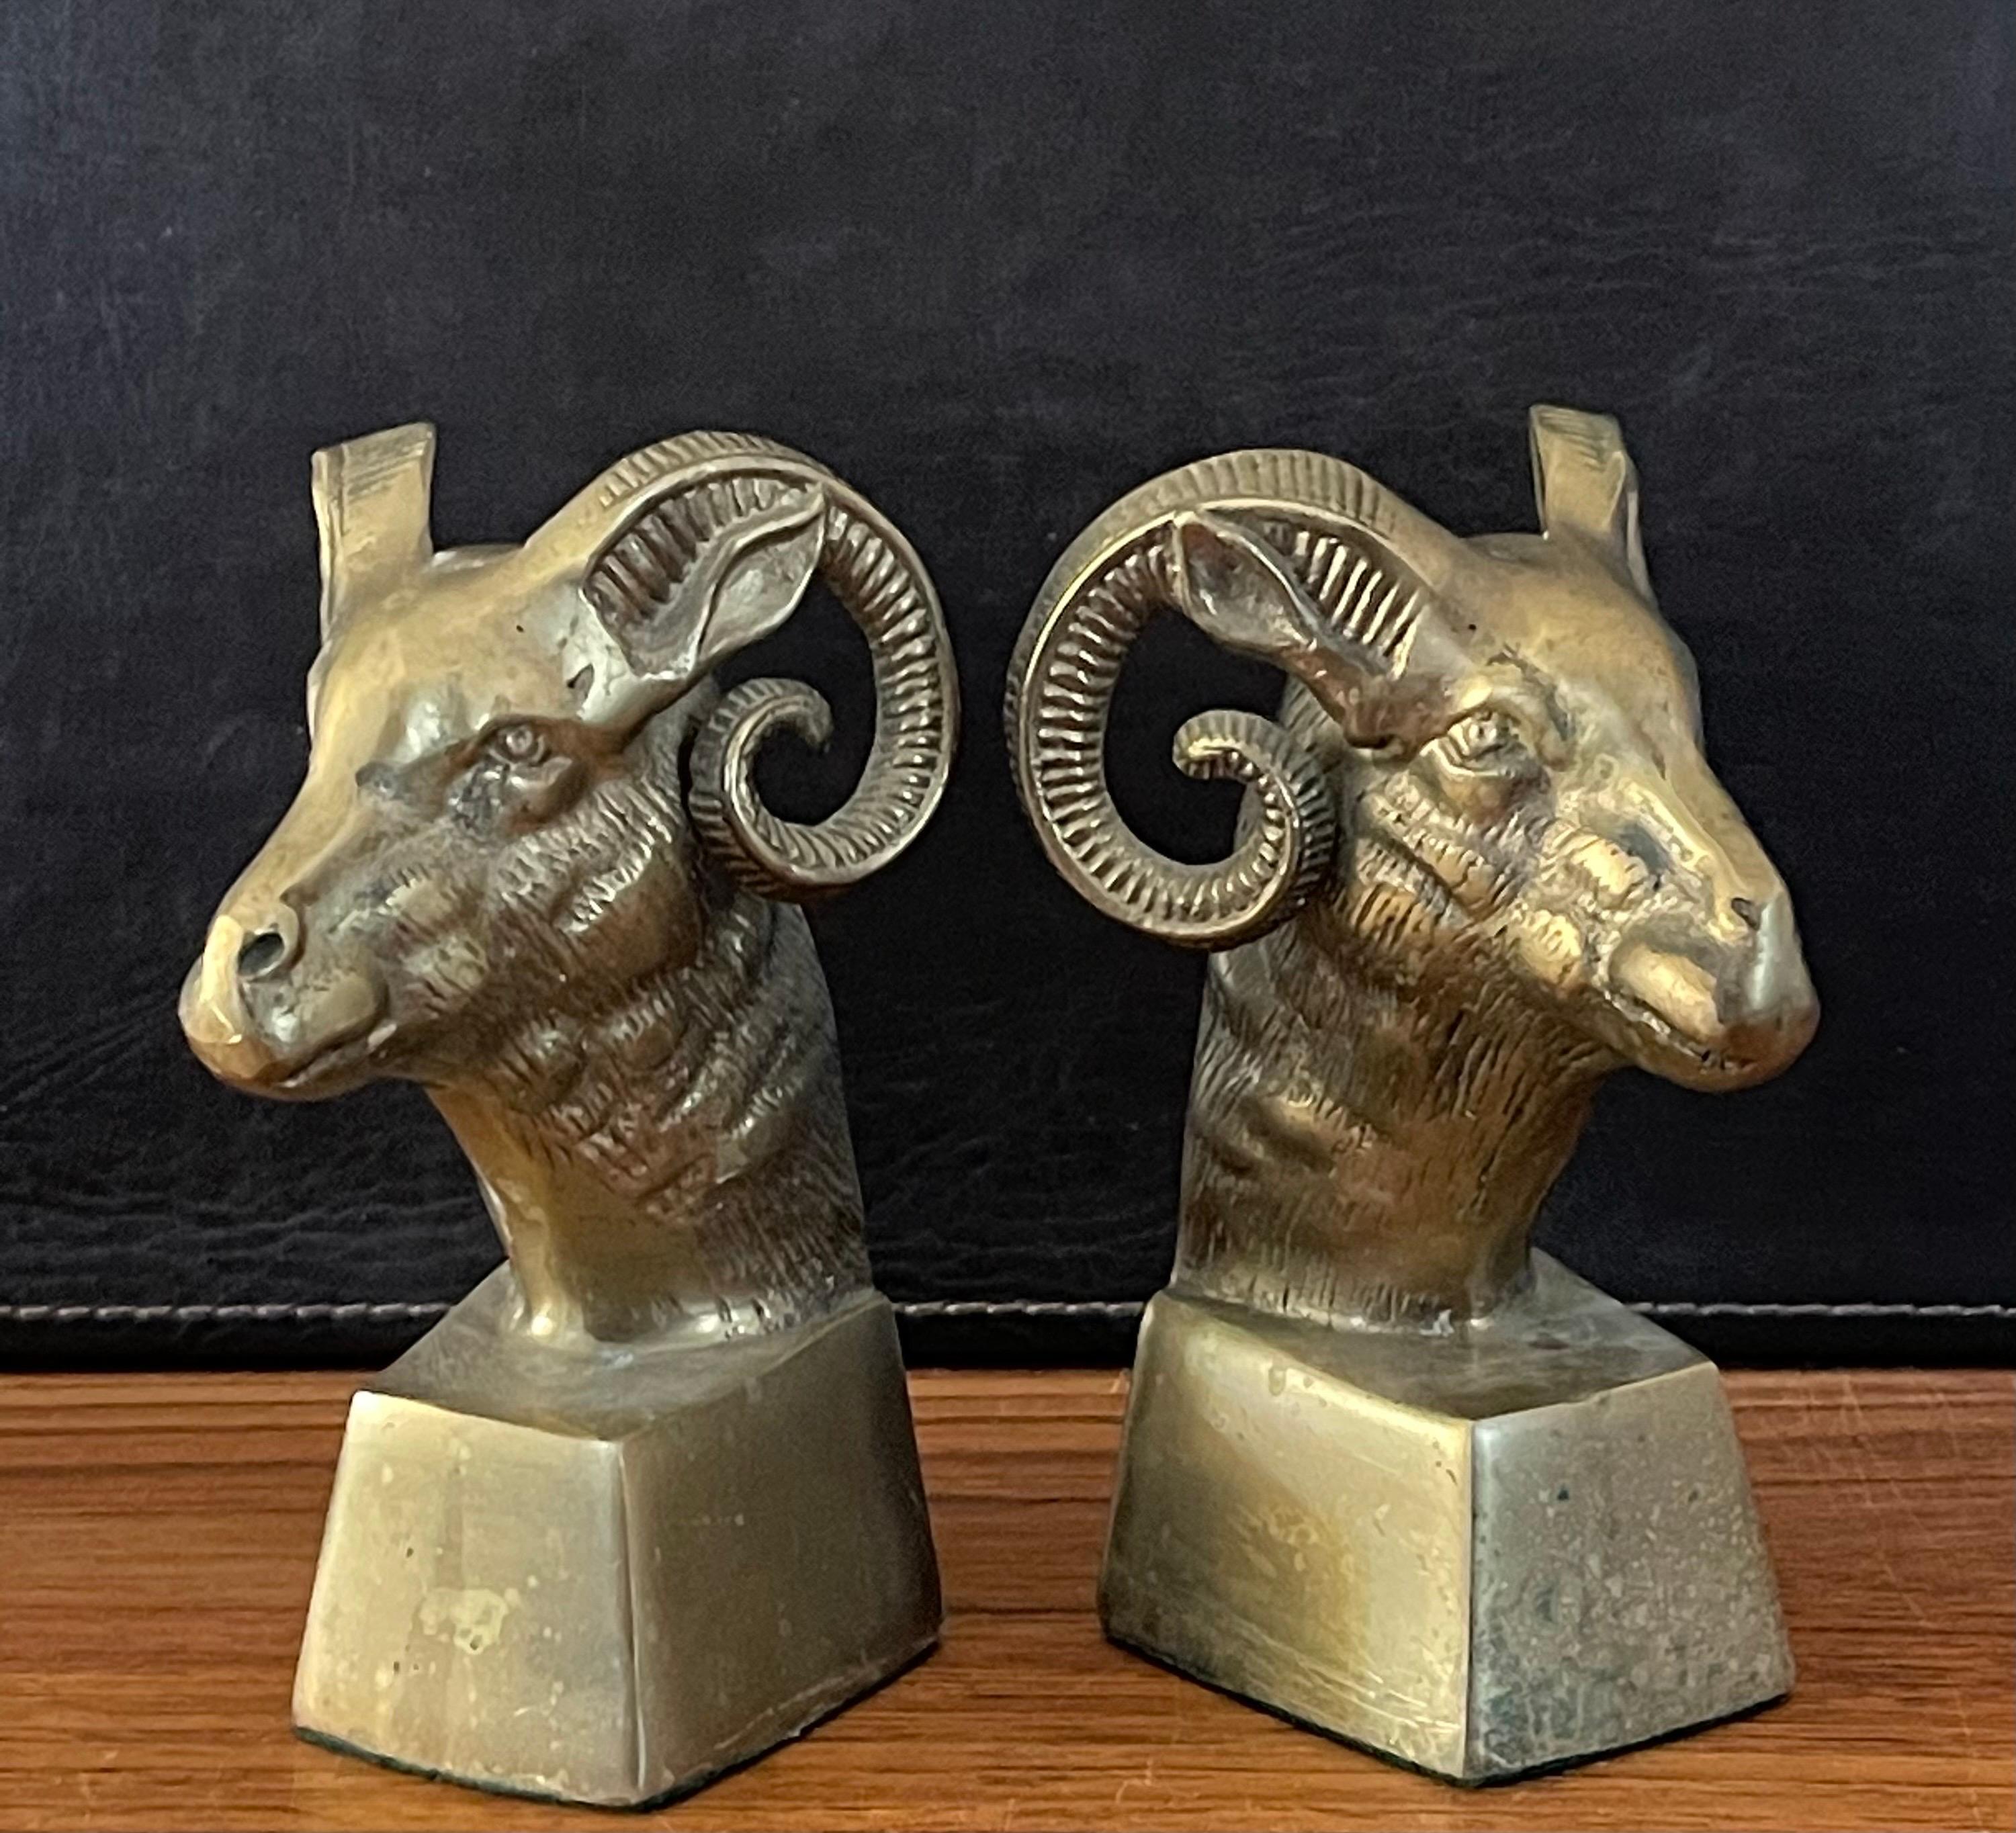 A pair of vintage brass rams head bookends circa 1970s. The bookends are in very good condition and measure 9